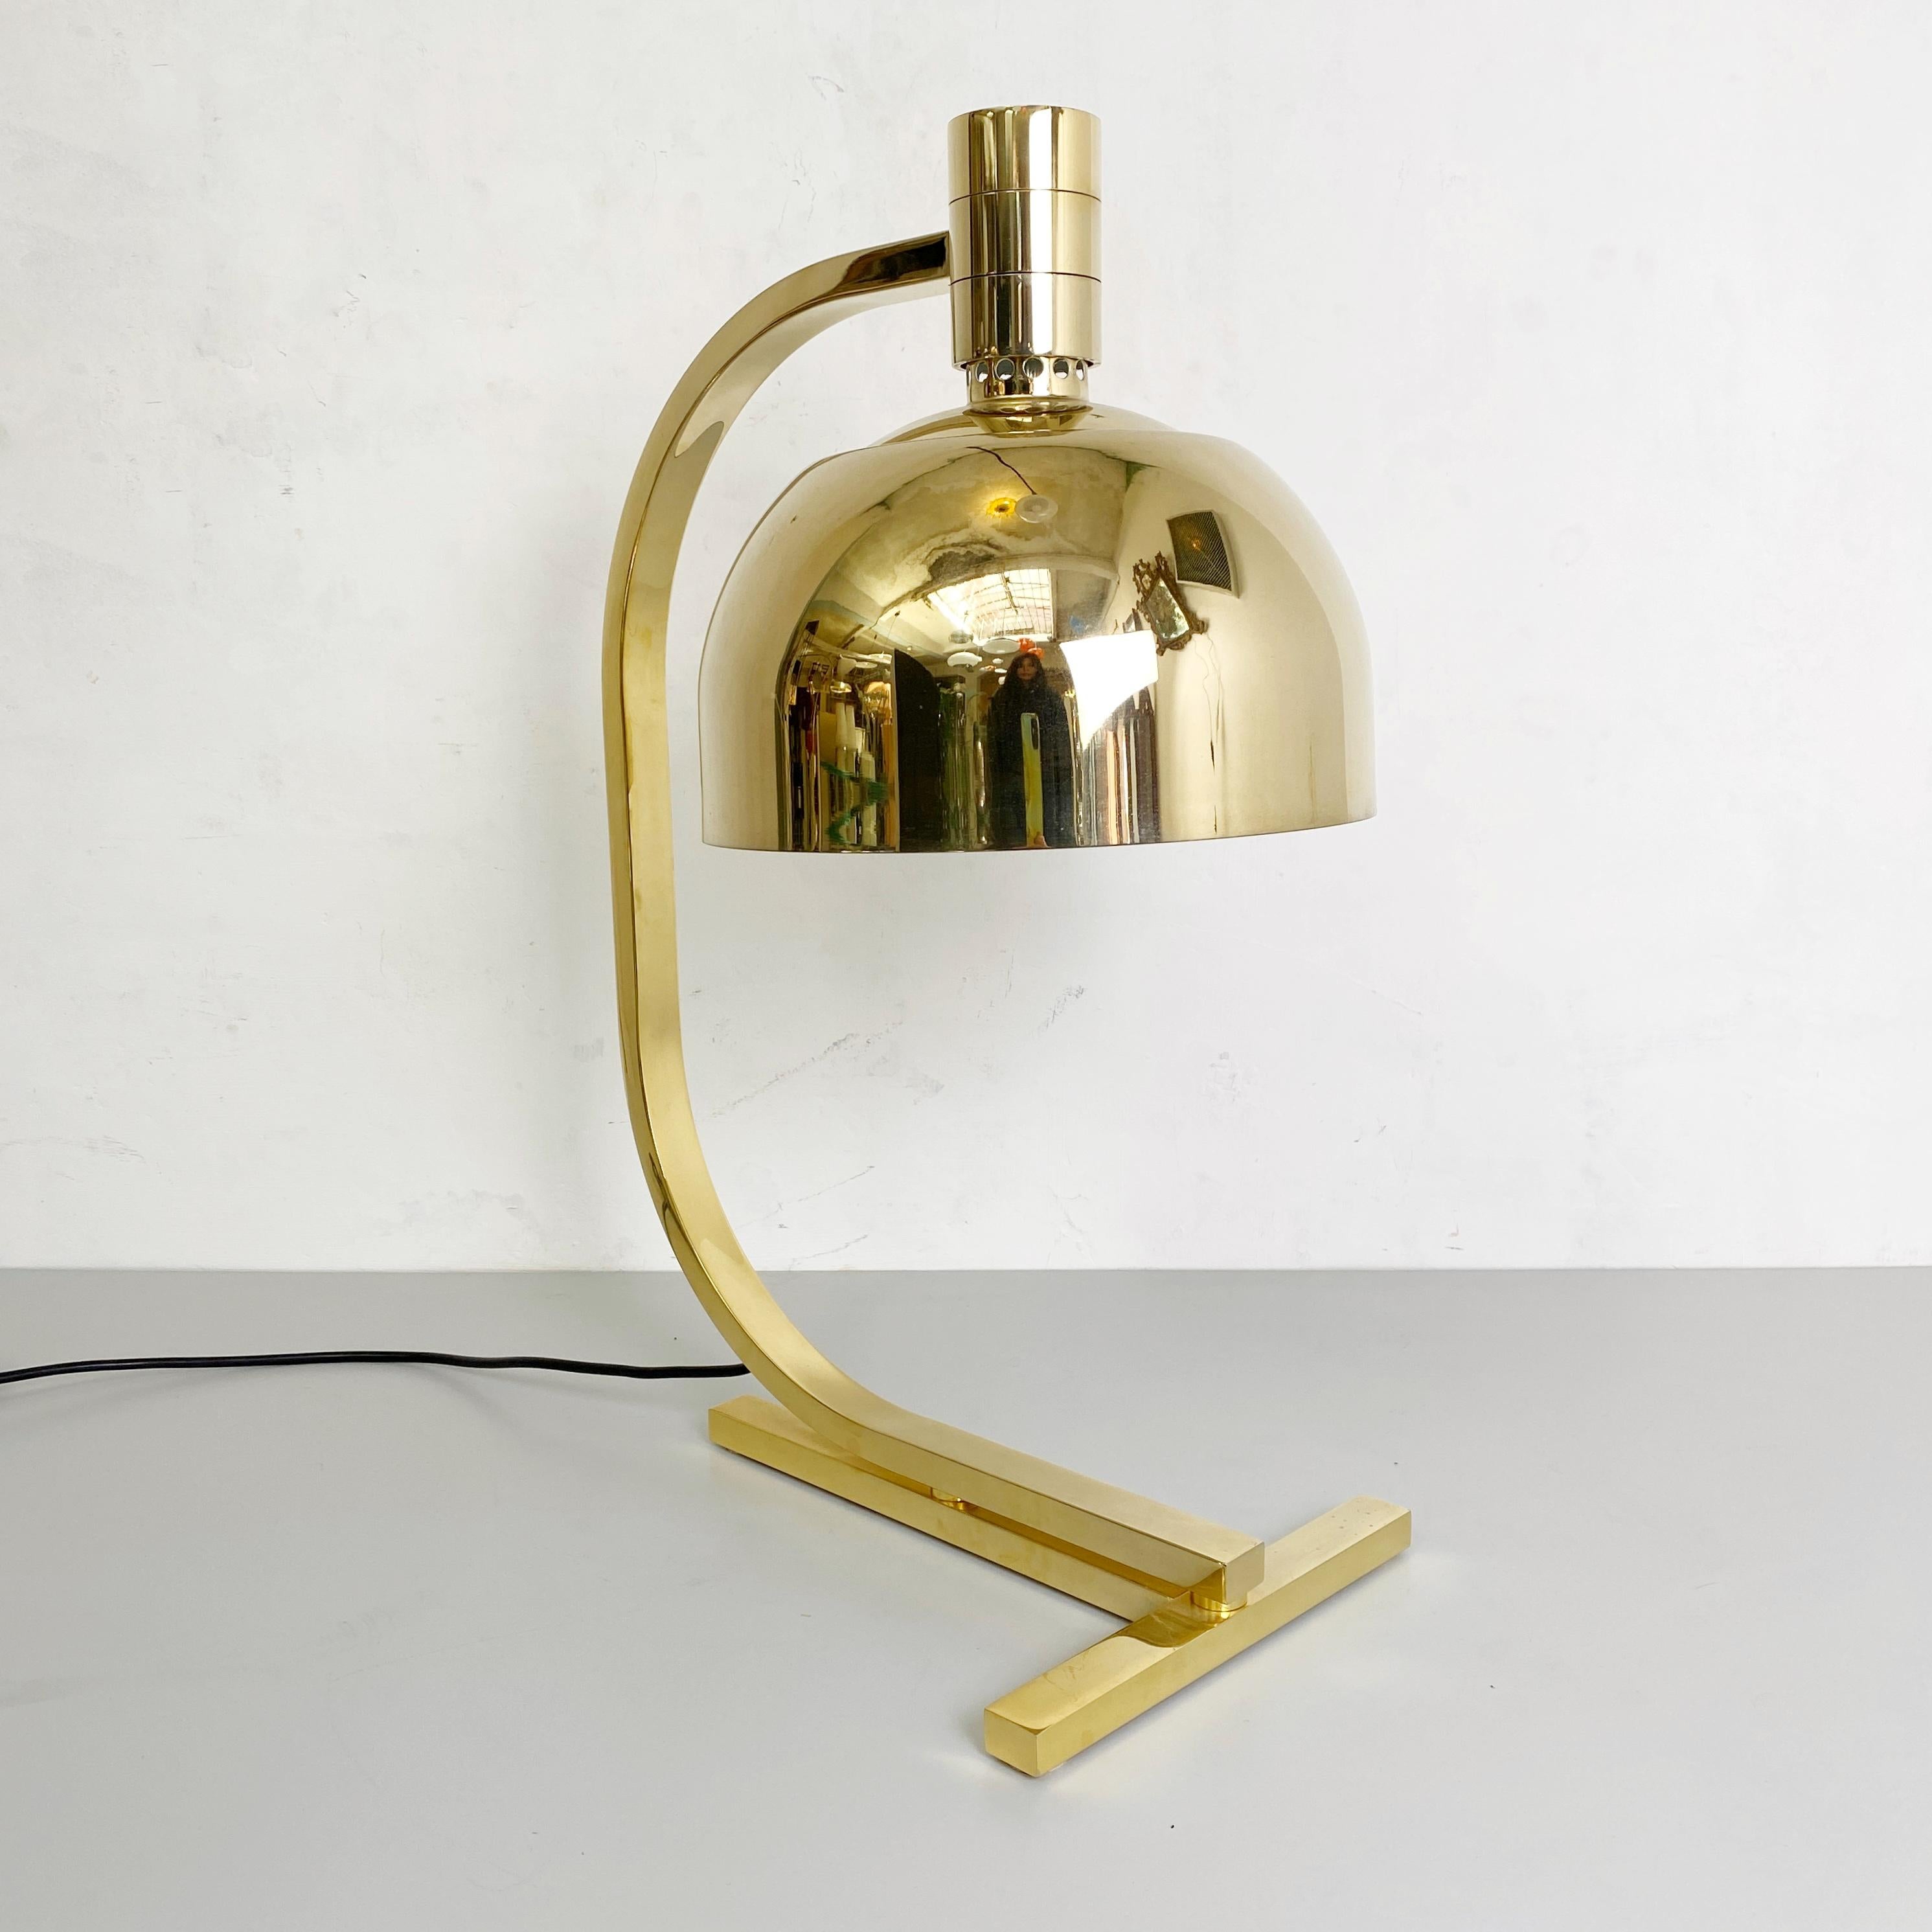 AM \ AS Gold Chrome Table Lamp by Franco Albini and Franca Helg for Sirrah, 1969 For Sale 5